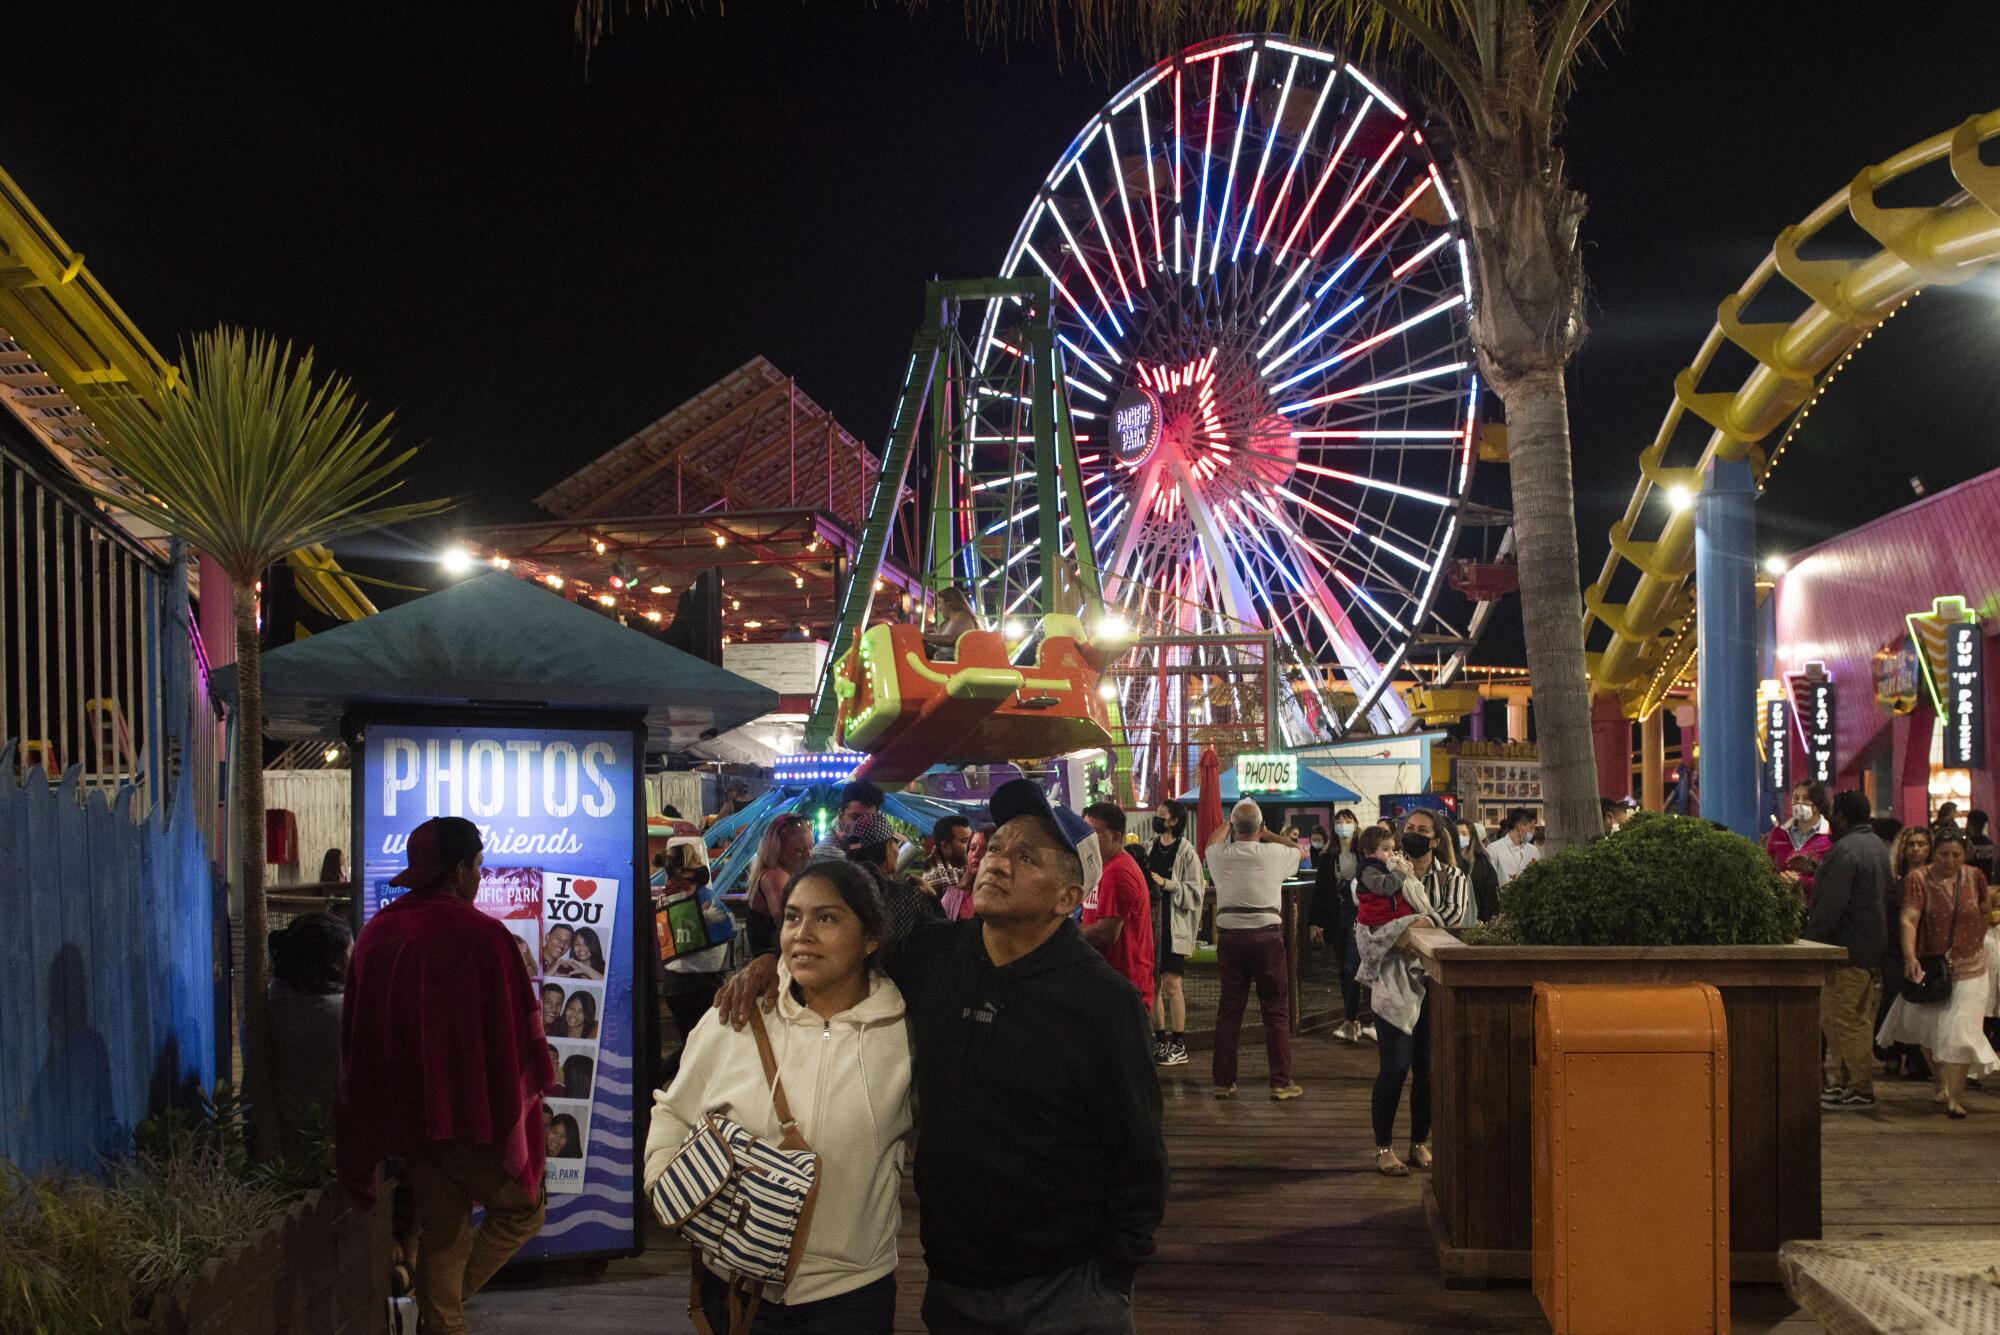 A woman and a man look up. In the background is a Ferris wheel lighted up in red, white and blue and other people.
